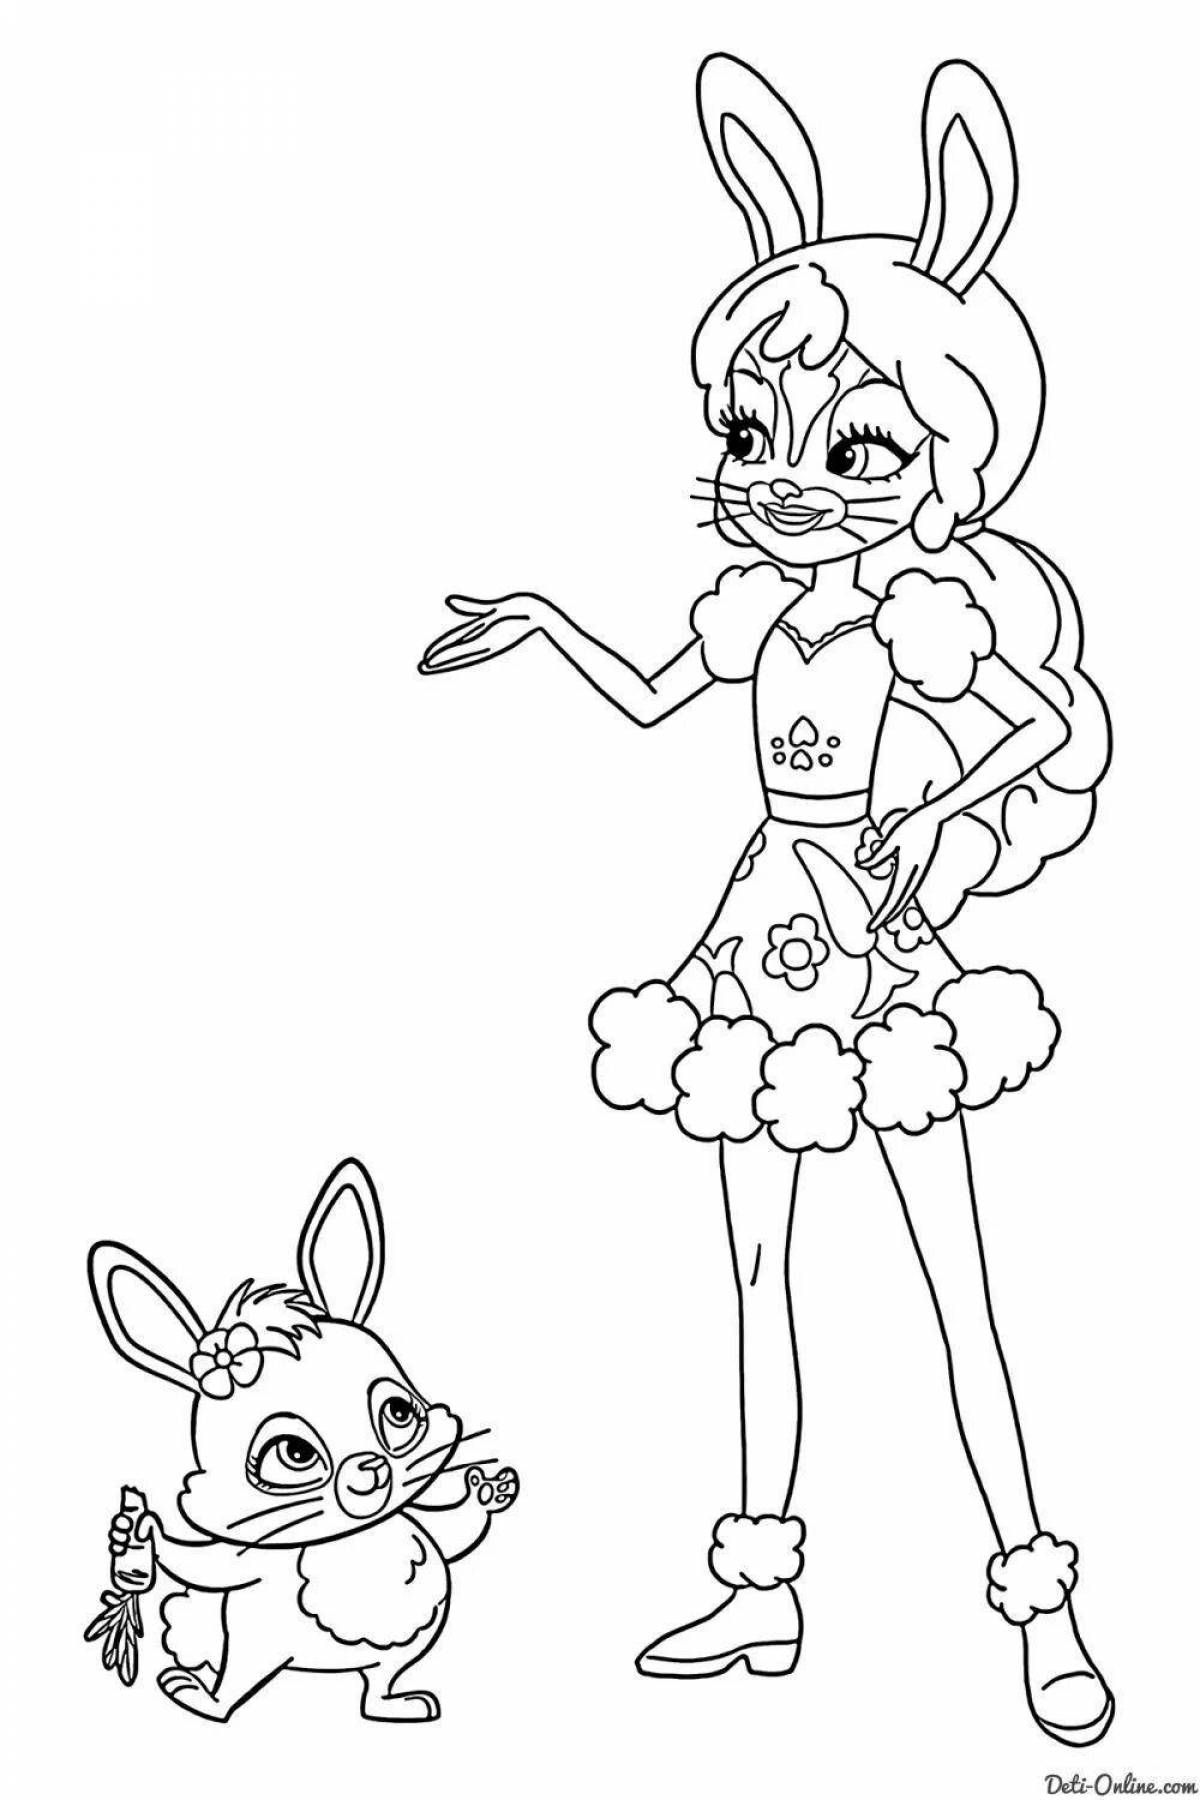 Adorable Bunny Girl Coloring Page